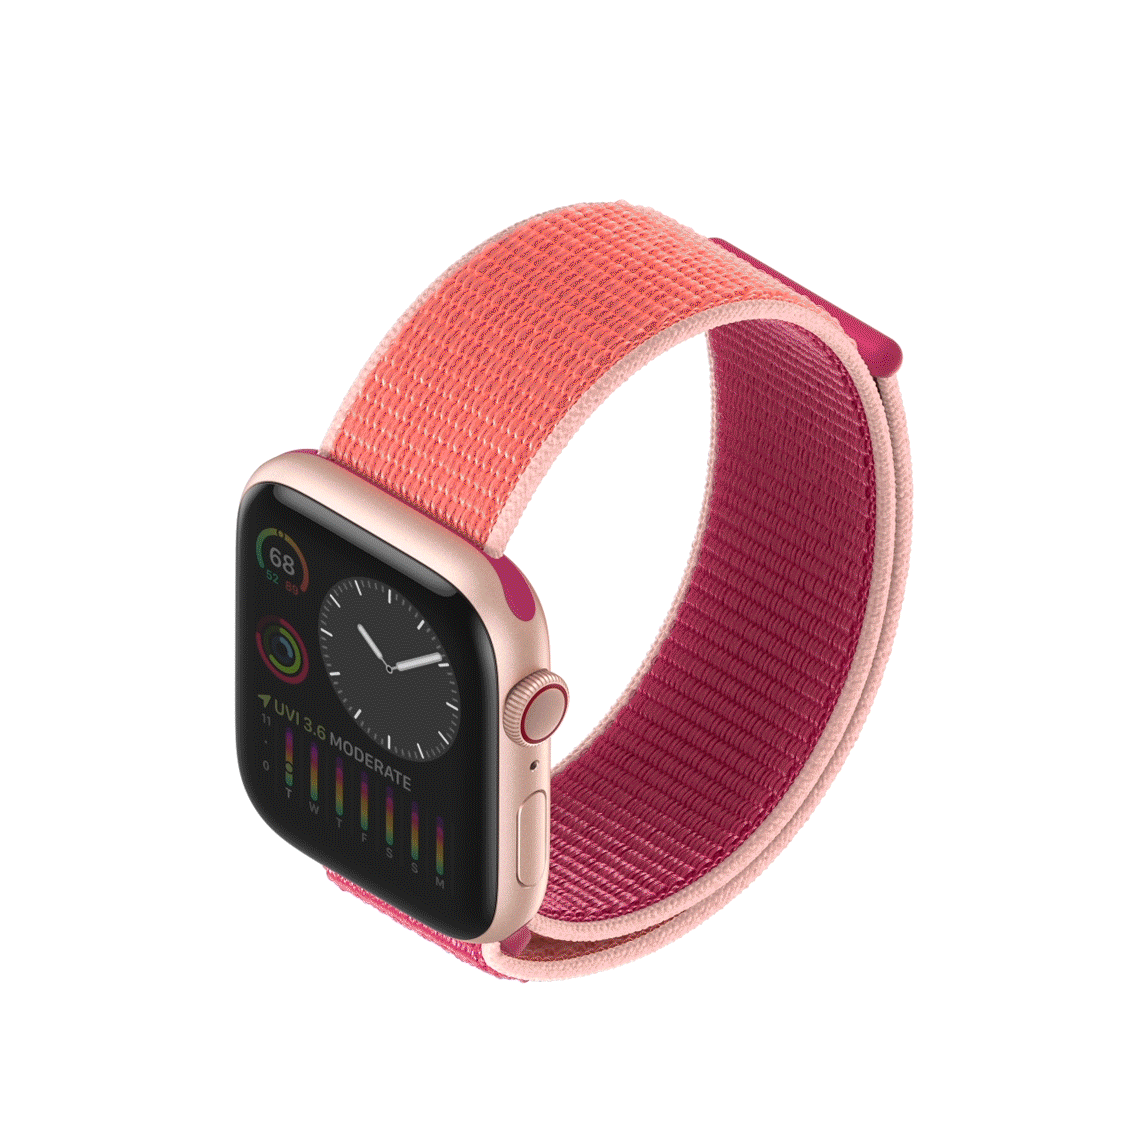 Apple Watch Series 5 comes with Always-On Retina Display, among other things 32